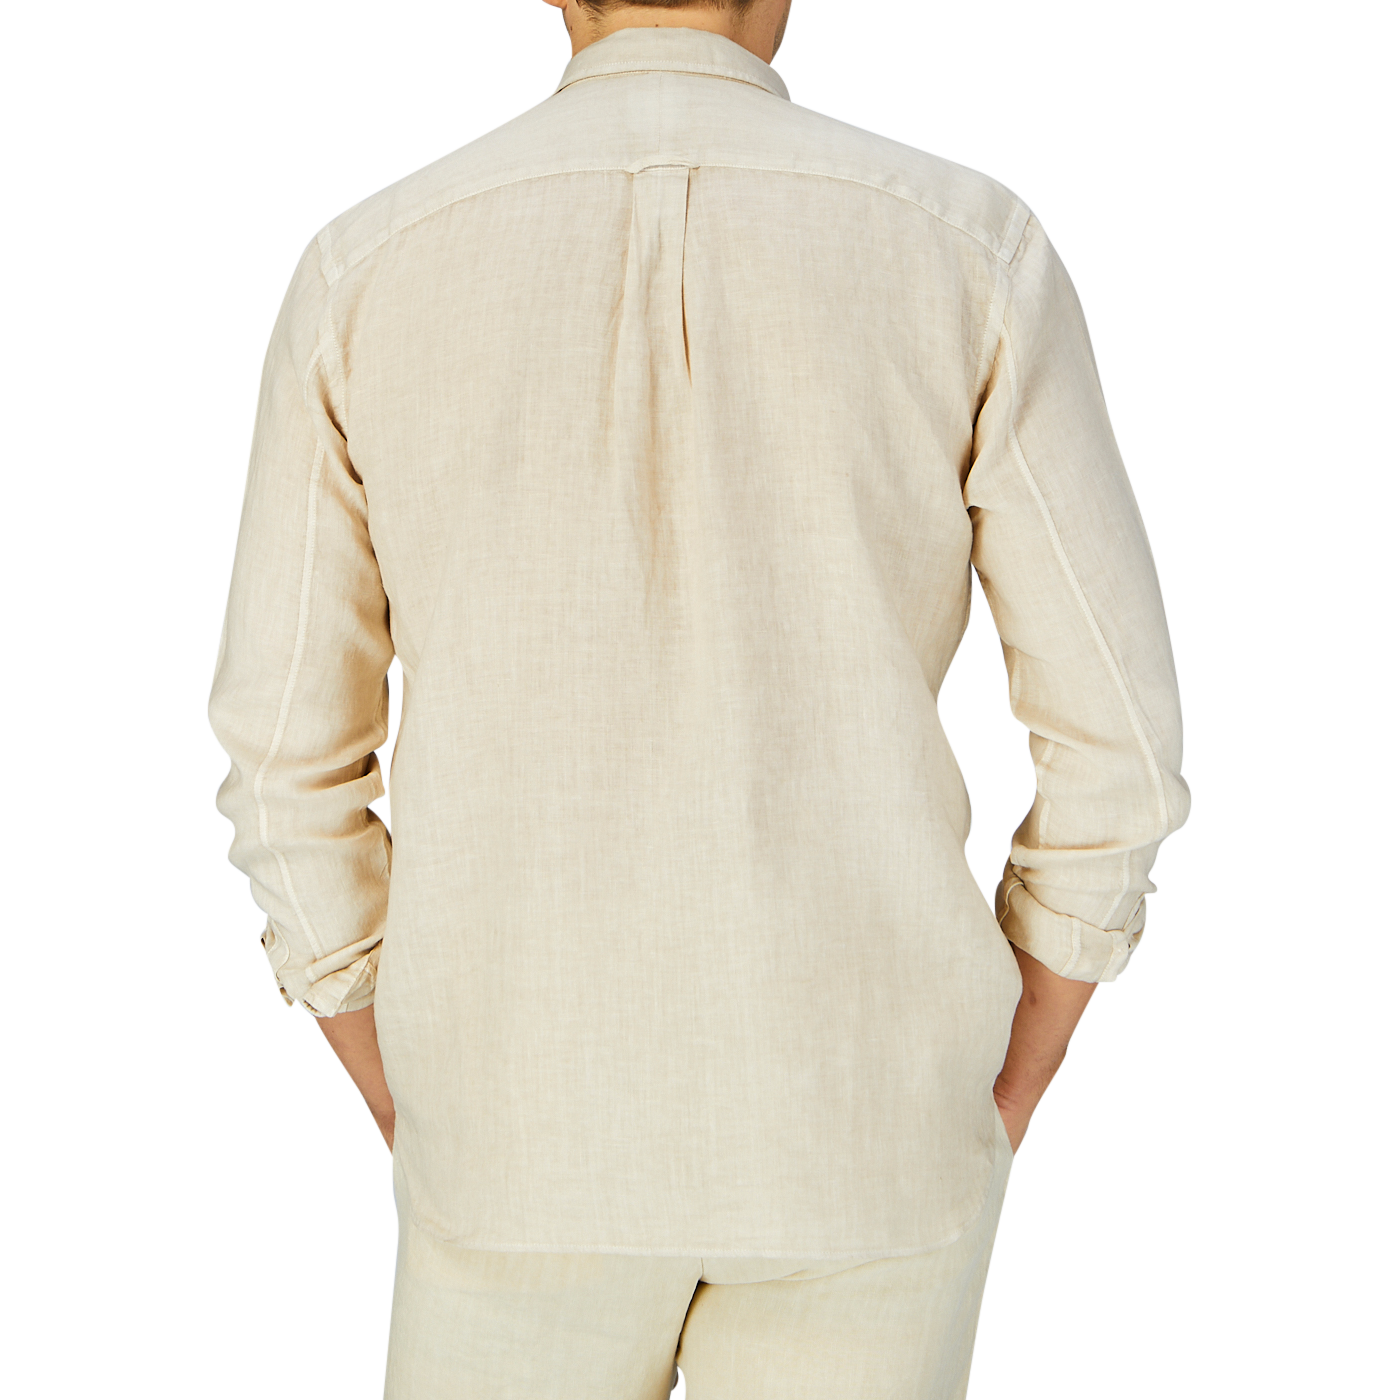 A person seen from behind wearing a Light Beige Washed Linen Legacy Shirt by Xacus, with a cut-away collar, long sleeves, and pleat detail.